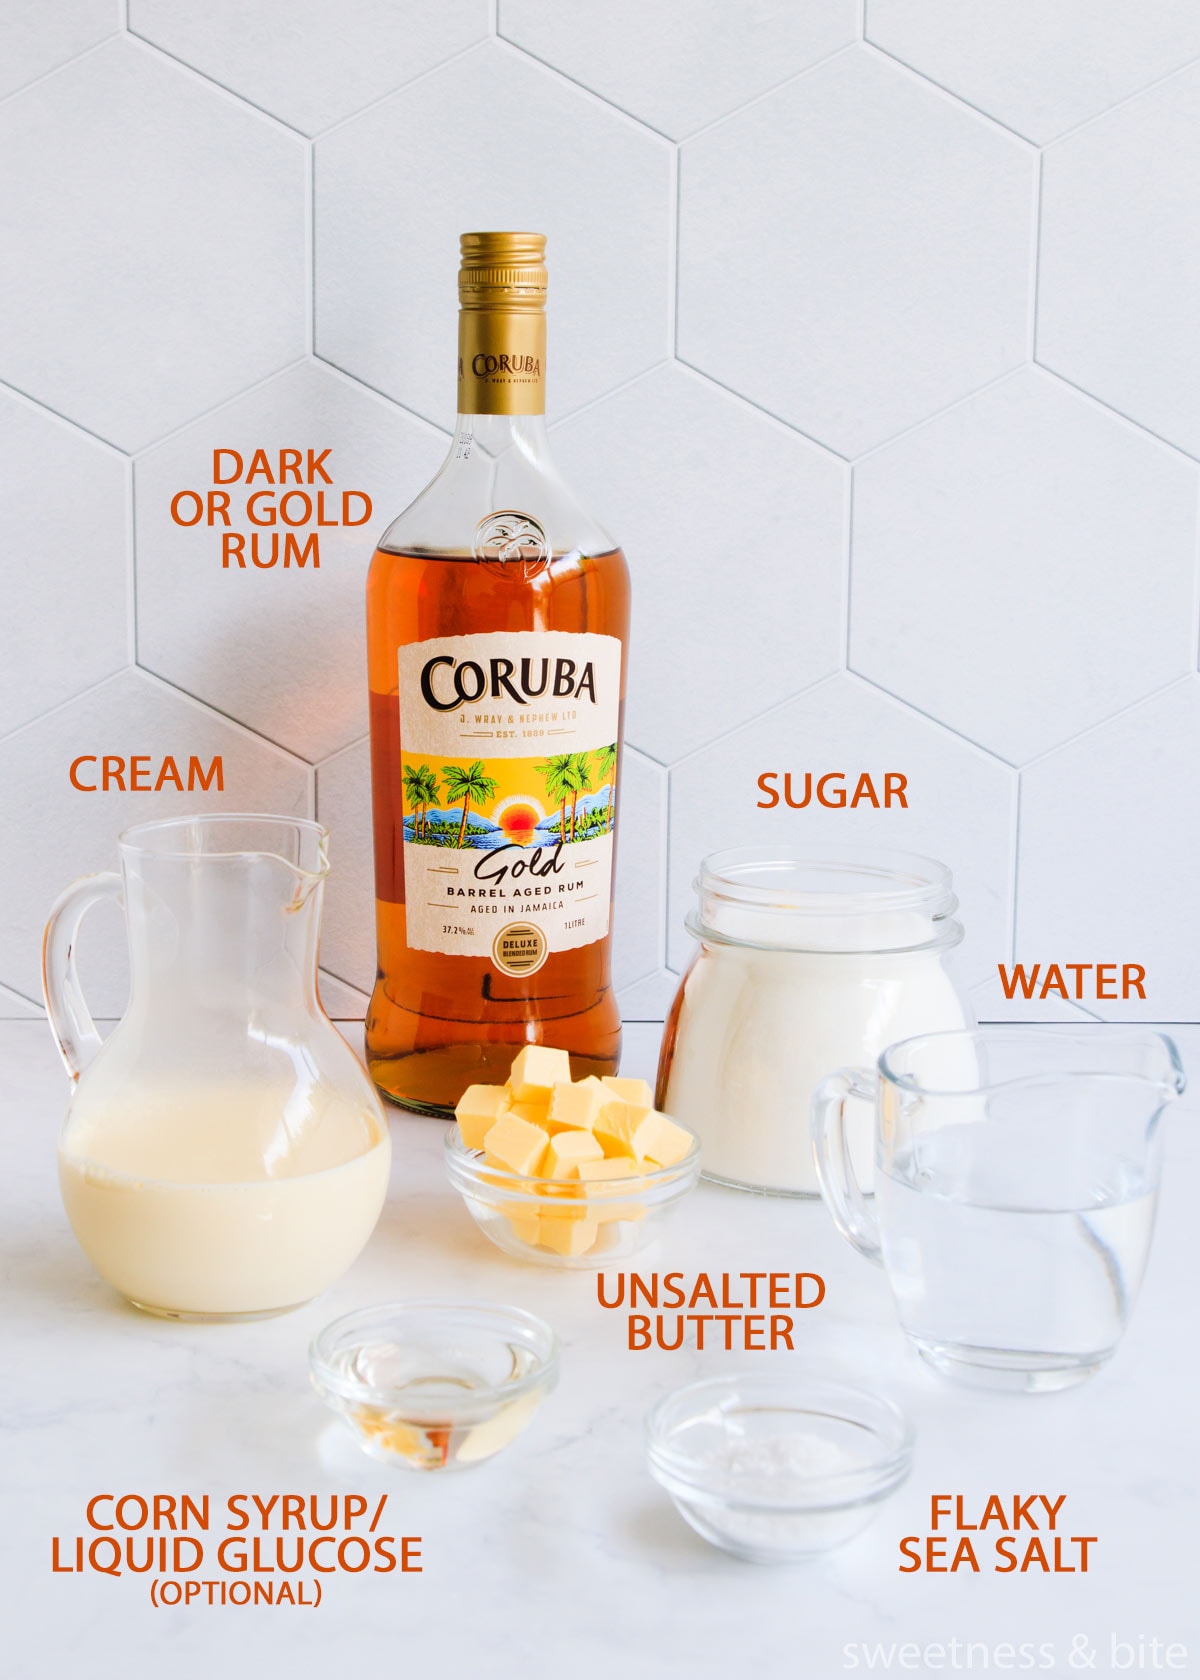 Rum caramel sauce ingredients on a grey background with orange text labels - rum, sugar, crea, water, butter, corn syrup and salt.